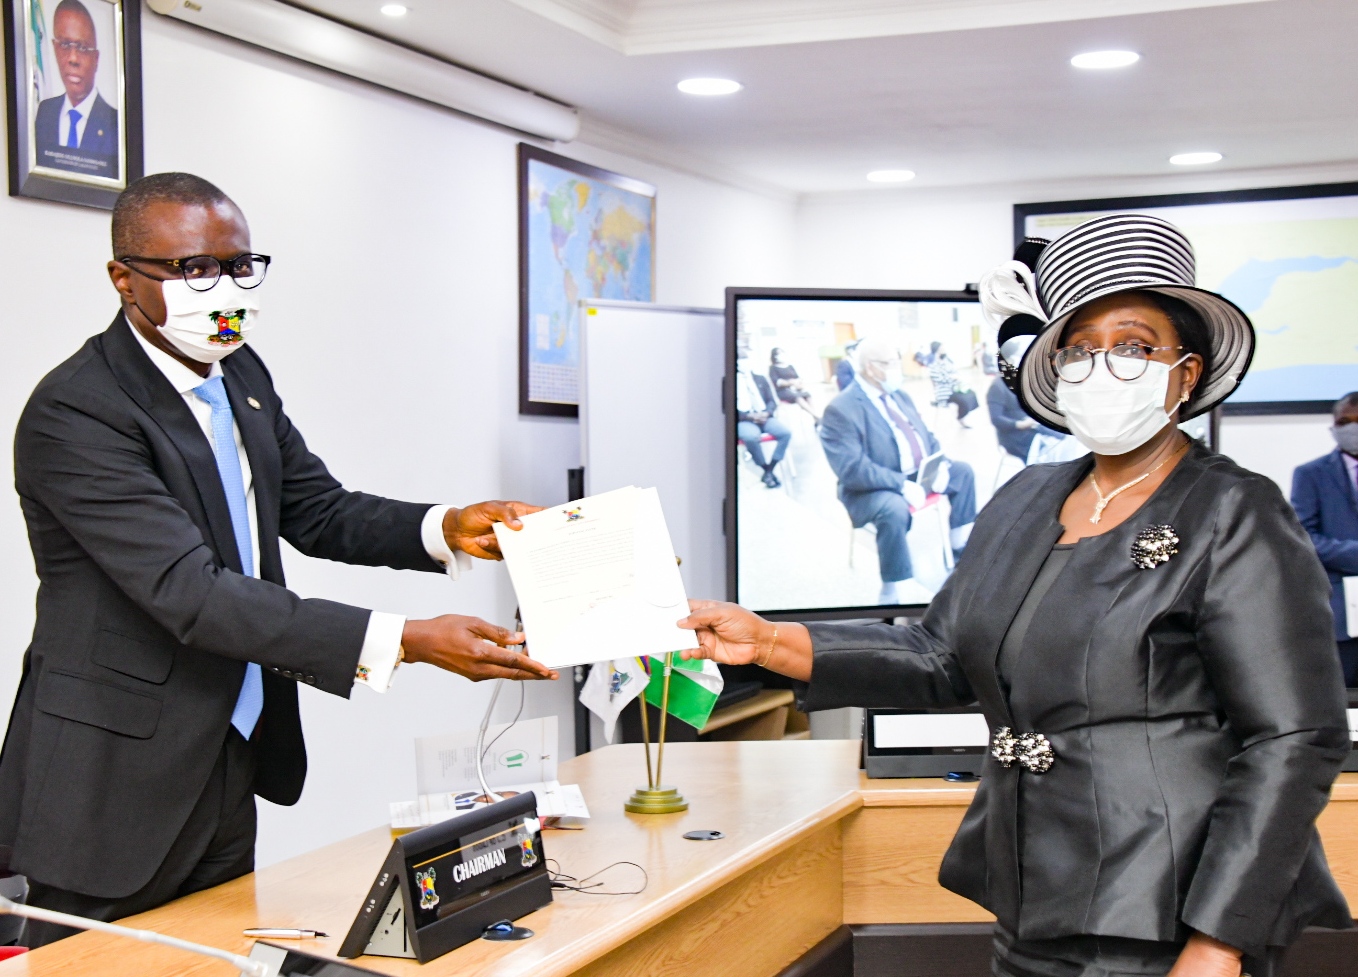 L-R: Lagos State Governor, Mr. Babajide Sanwo-Olu, with Hon. Justice Dorcas Taiwo Olatokun, after her swearing-in as a Judge of the State High Court, at the Executive Council Chamber, Lagos House, Alausa, Ikeja, on Tuesday, May 12, 2020.